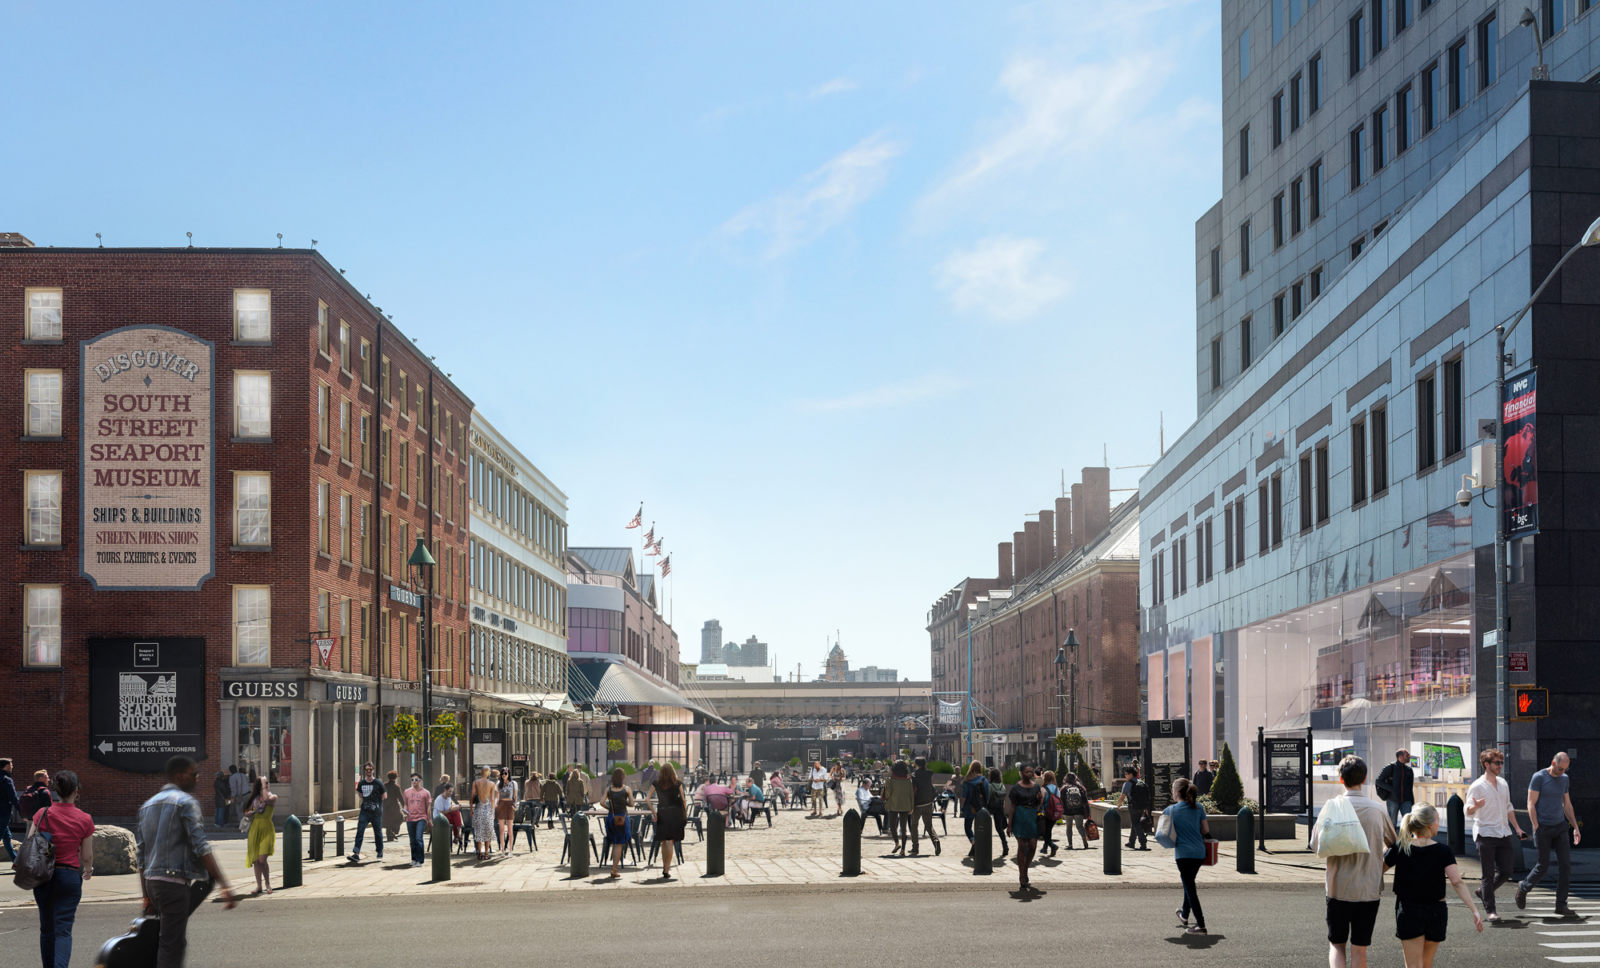 South Street Seaport Entrance By Day